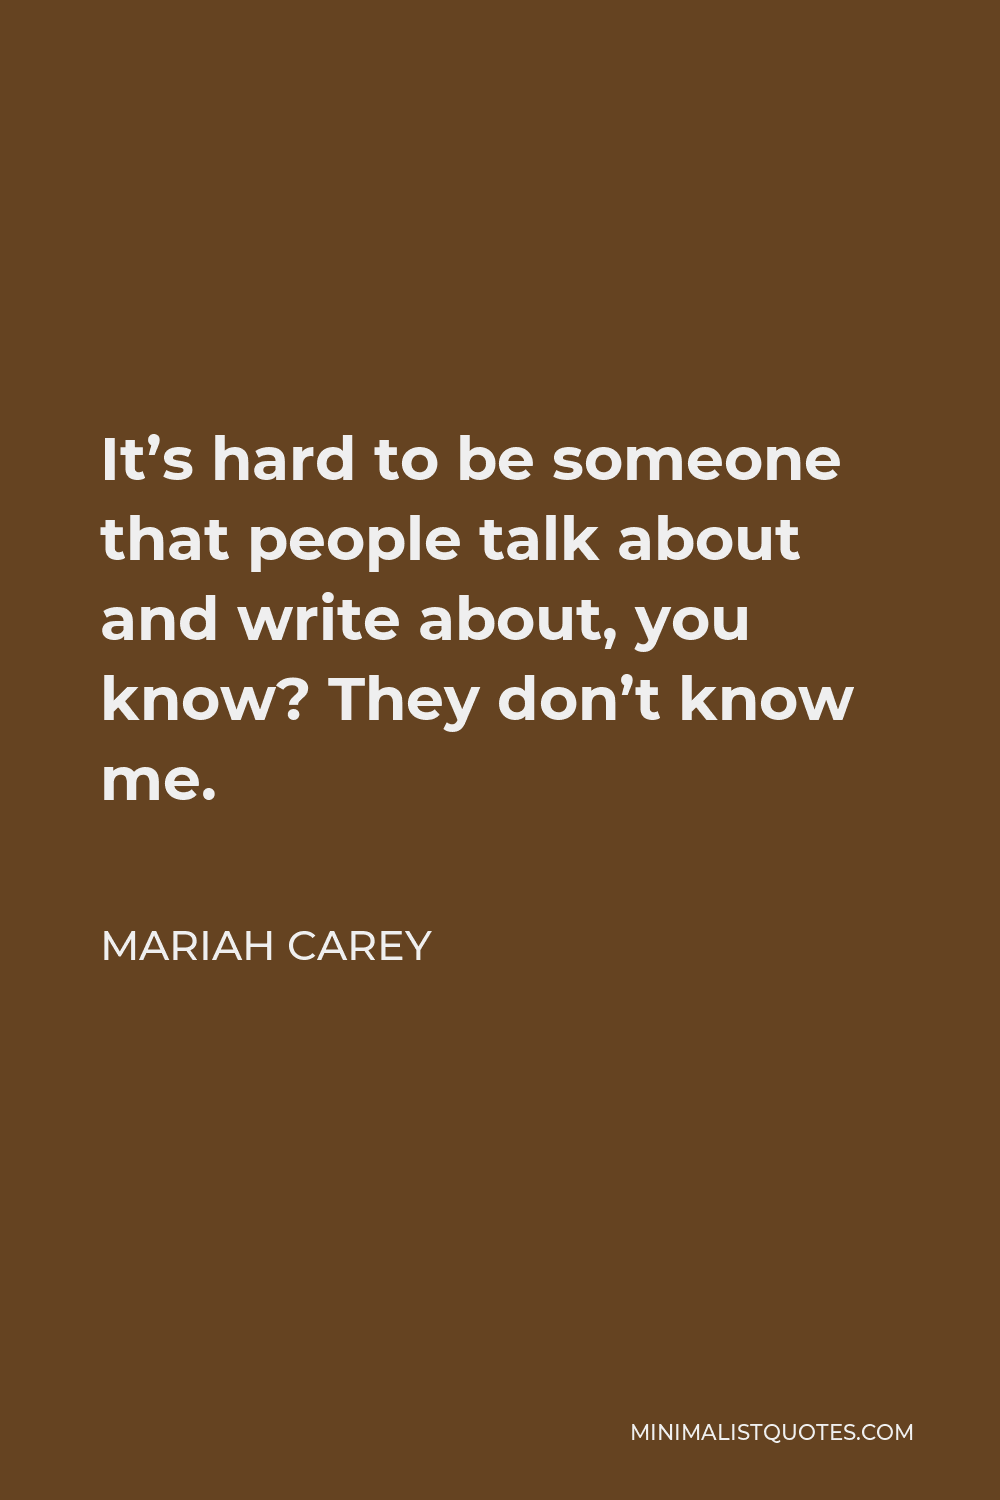 Mariah Carey Quote - It’s hard to be someone that people talk about and write about, you know? They don’t know me.